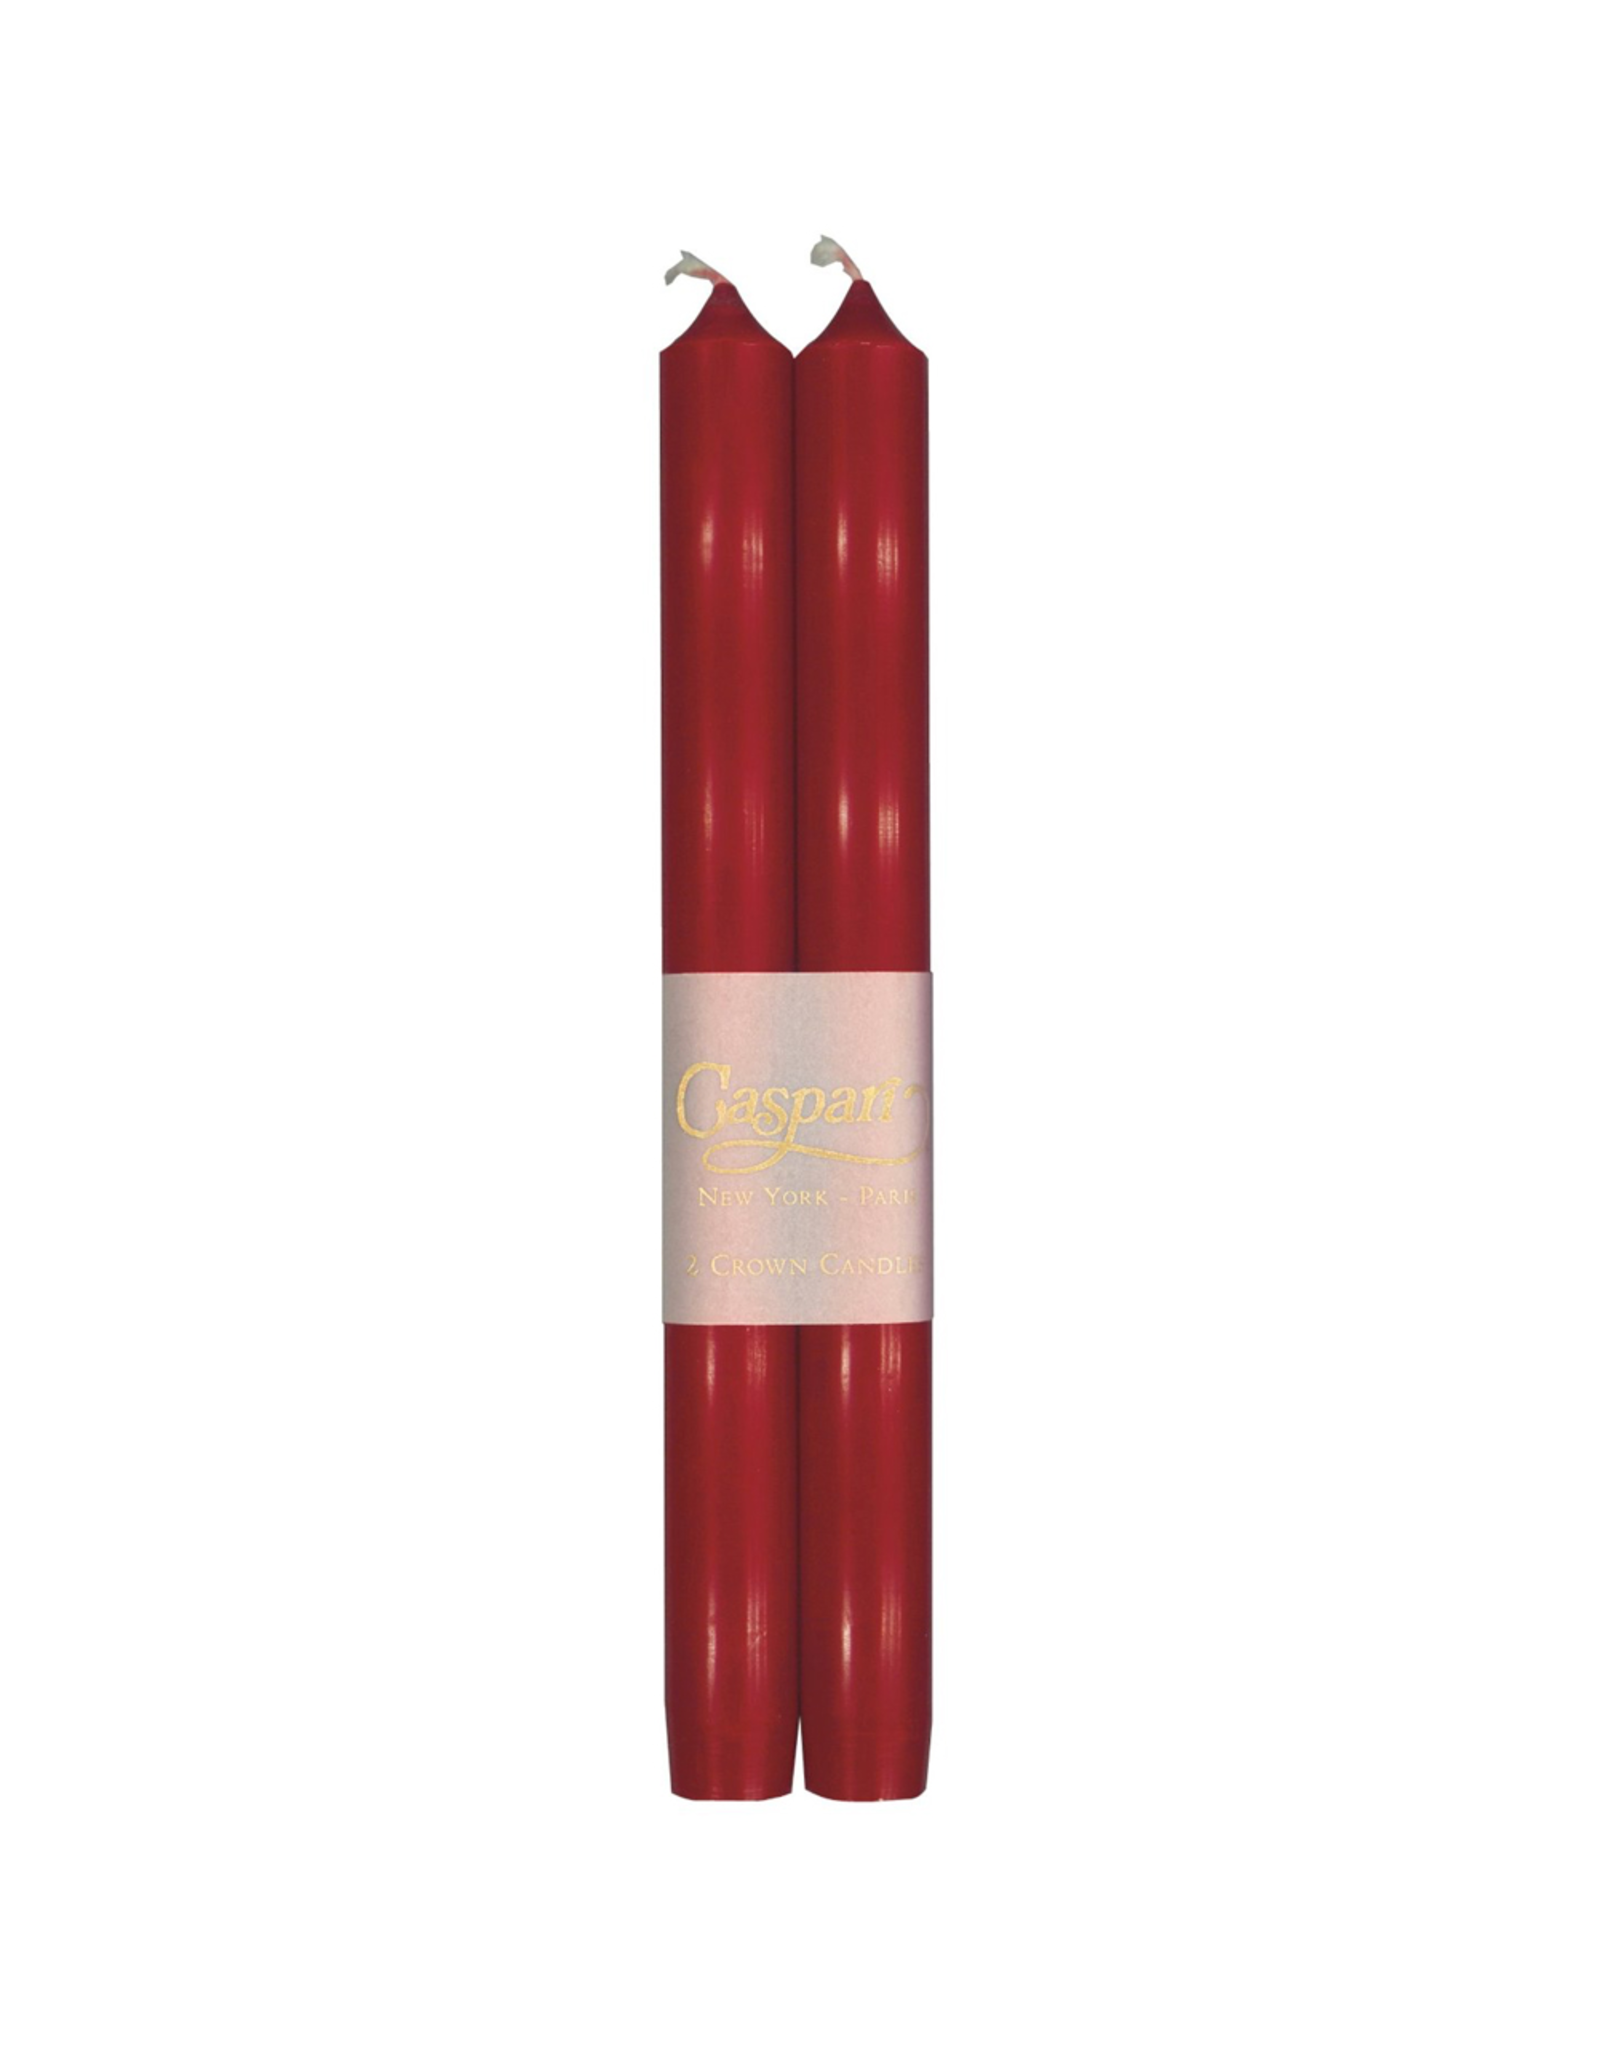 Caspari Crown Candles Tapers 10 inch 2pk Red